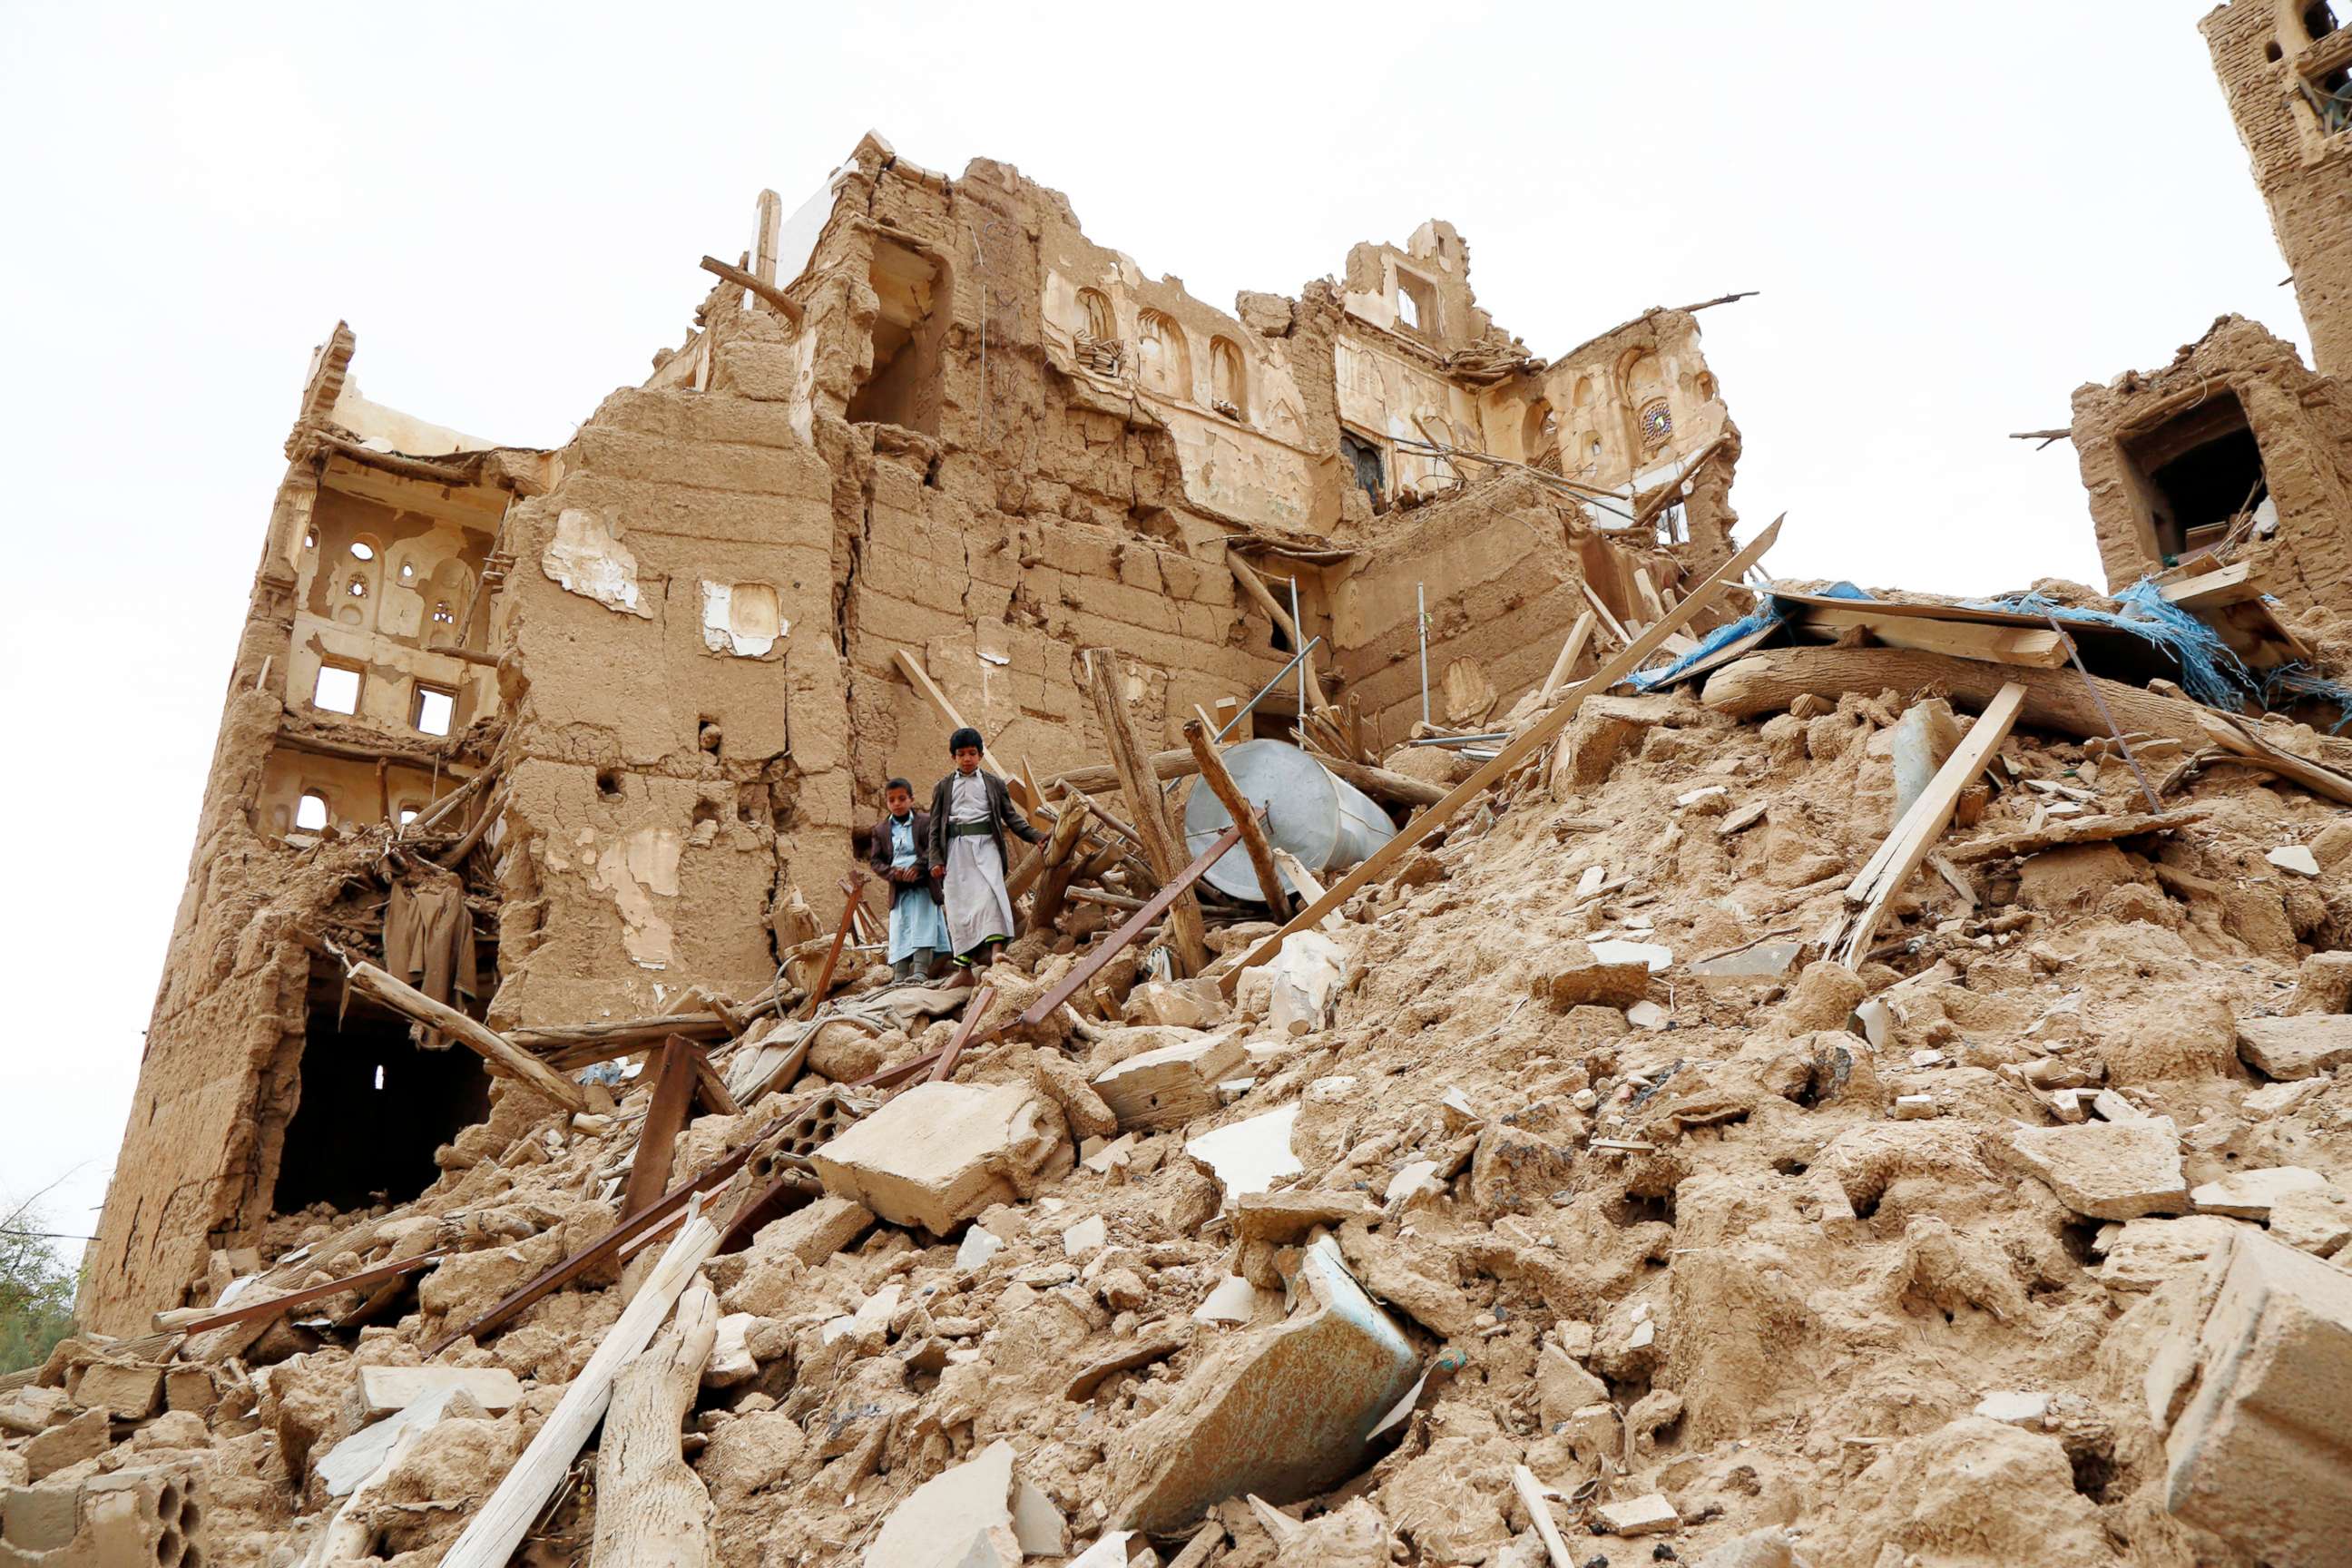 PHOTO:  Children walk on the rubble of houses destroyed by airstrikes during the ongoing conflict in Saada province, Yemen, March 19, 2020.